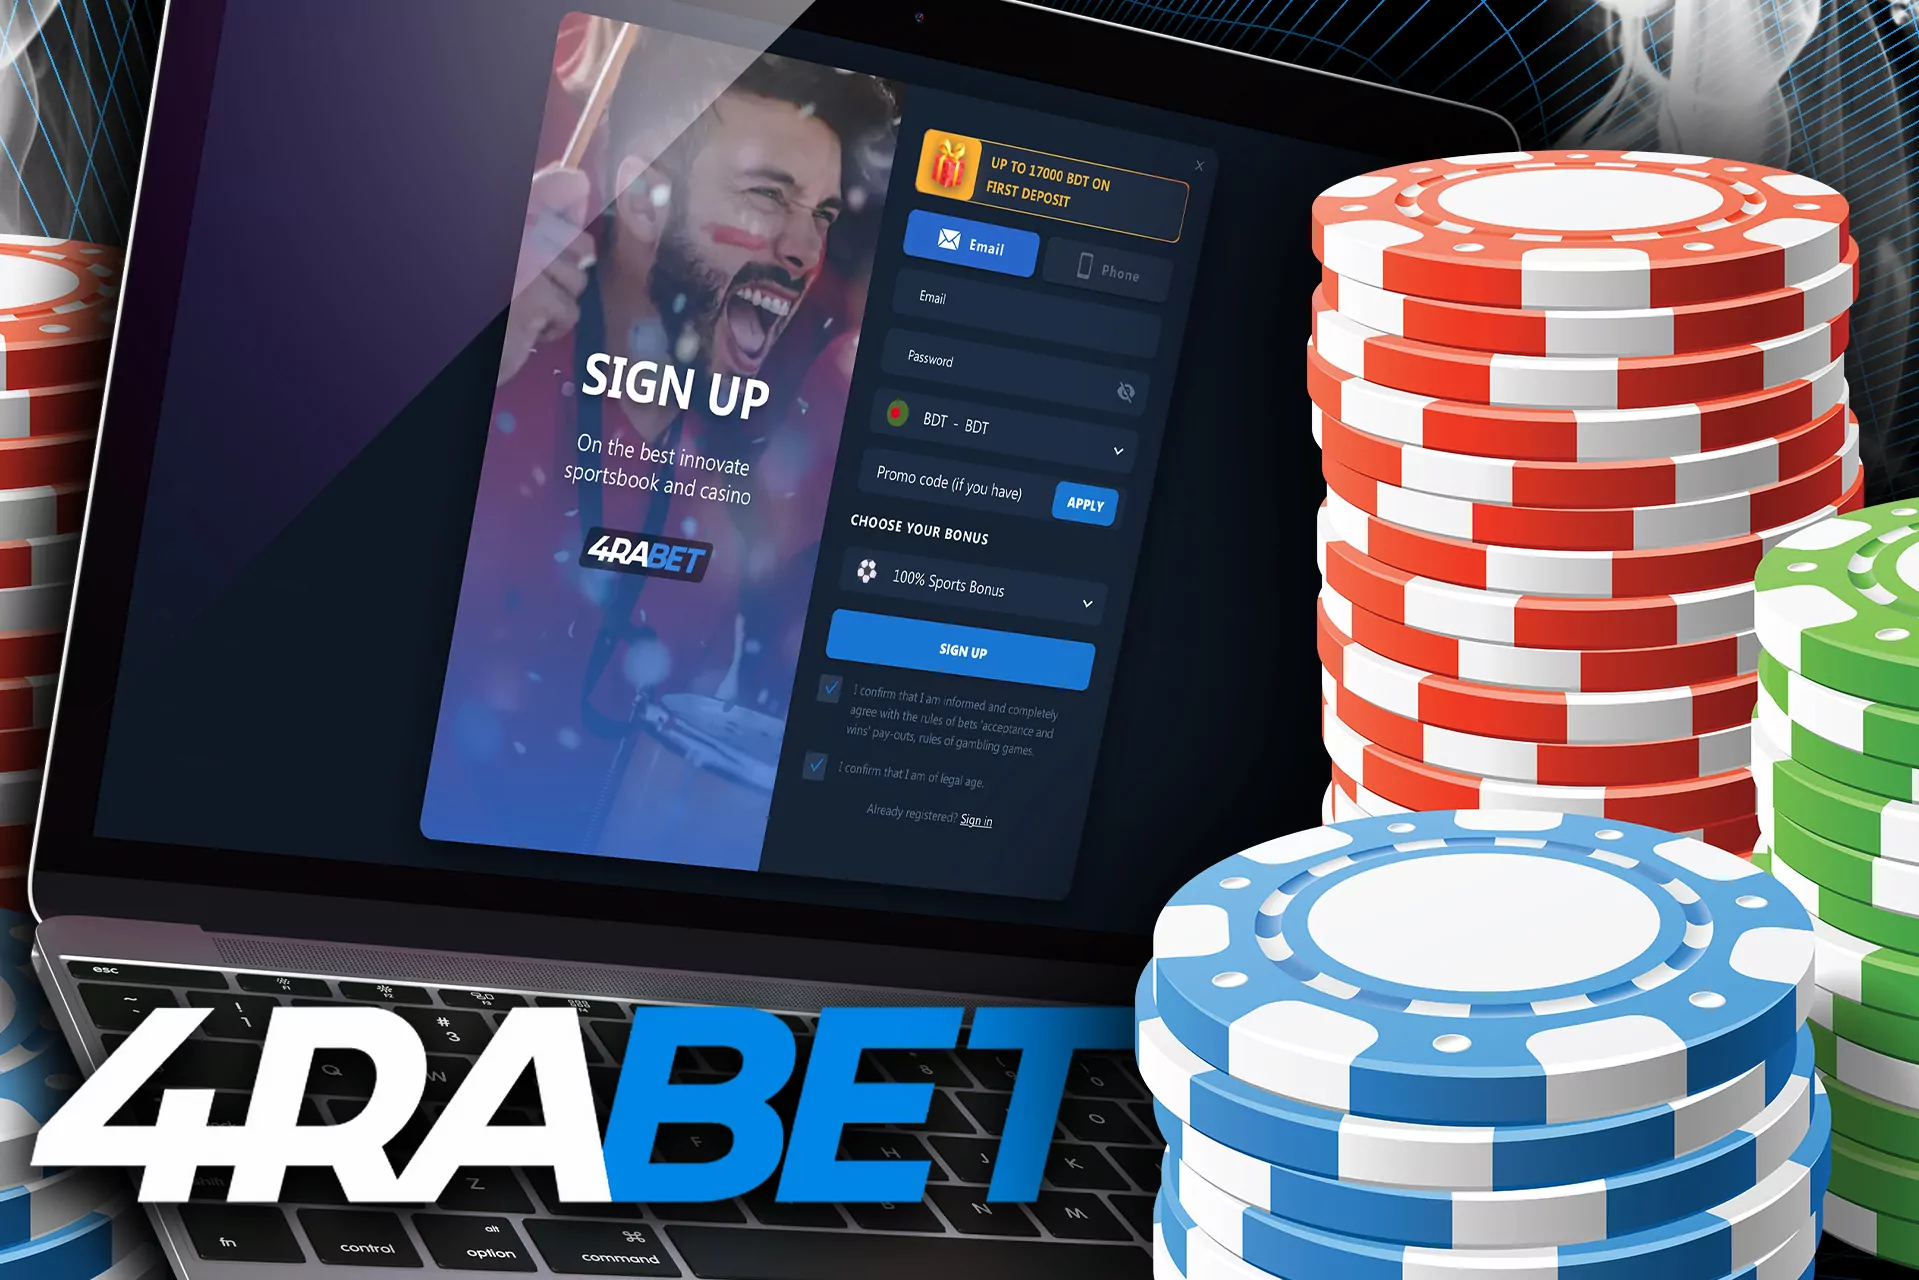 Log in to the 4rabet site and go to the casino section.